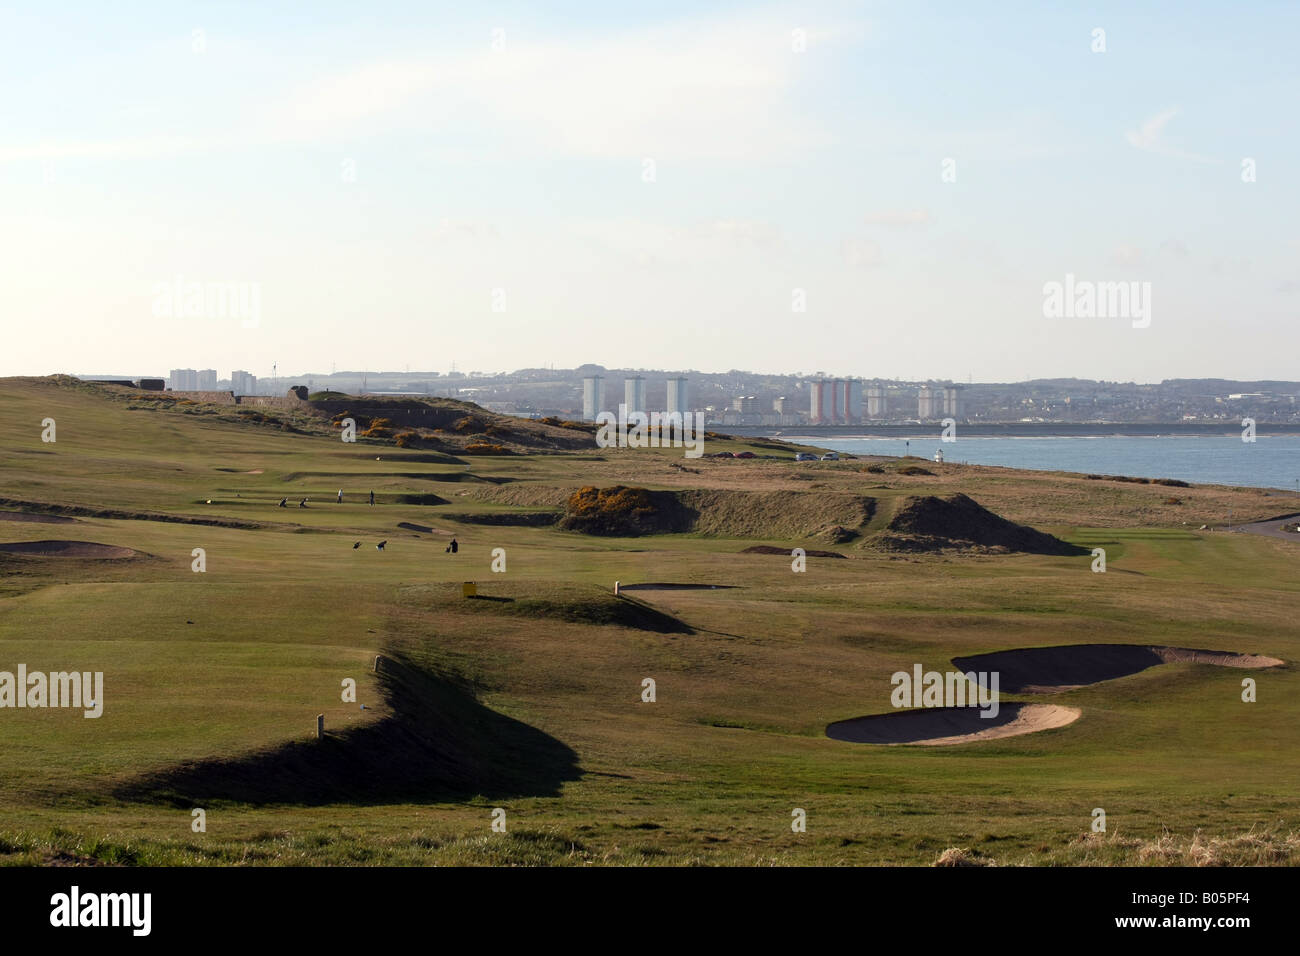 Balnagask High Resolution Stock Photography and Images - Alamy